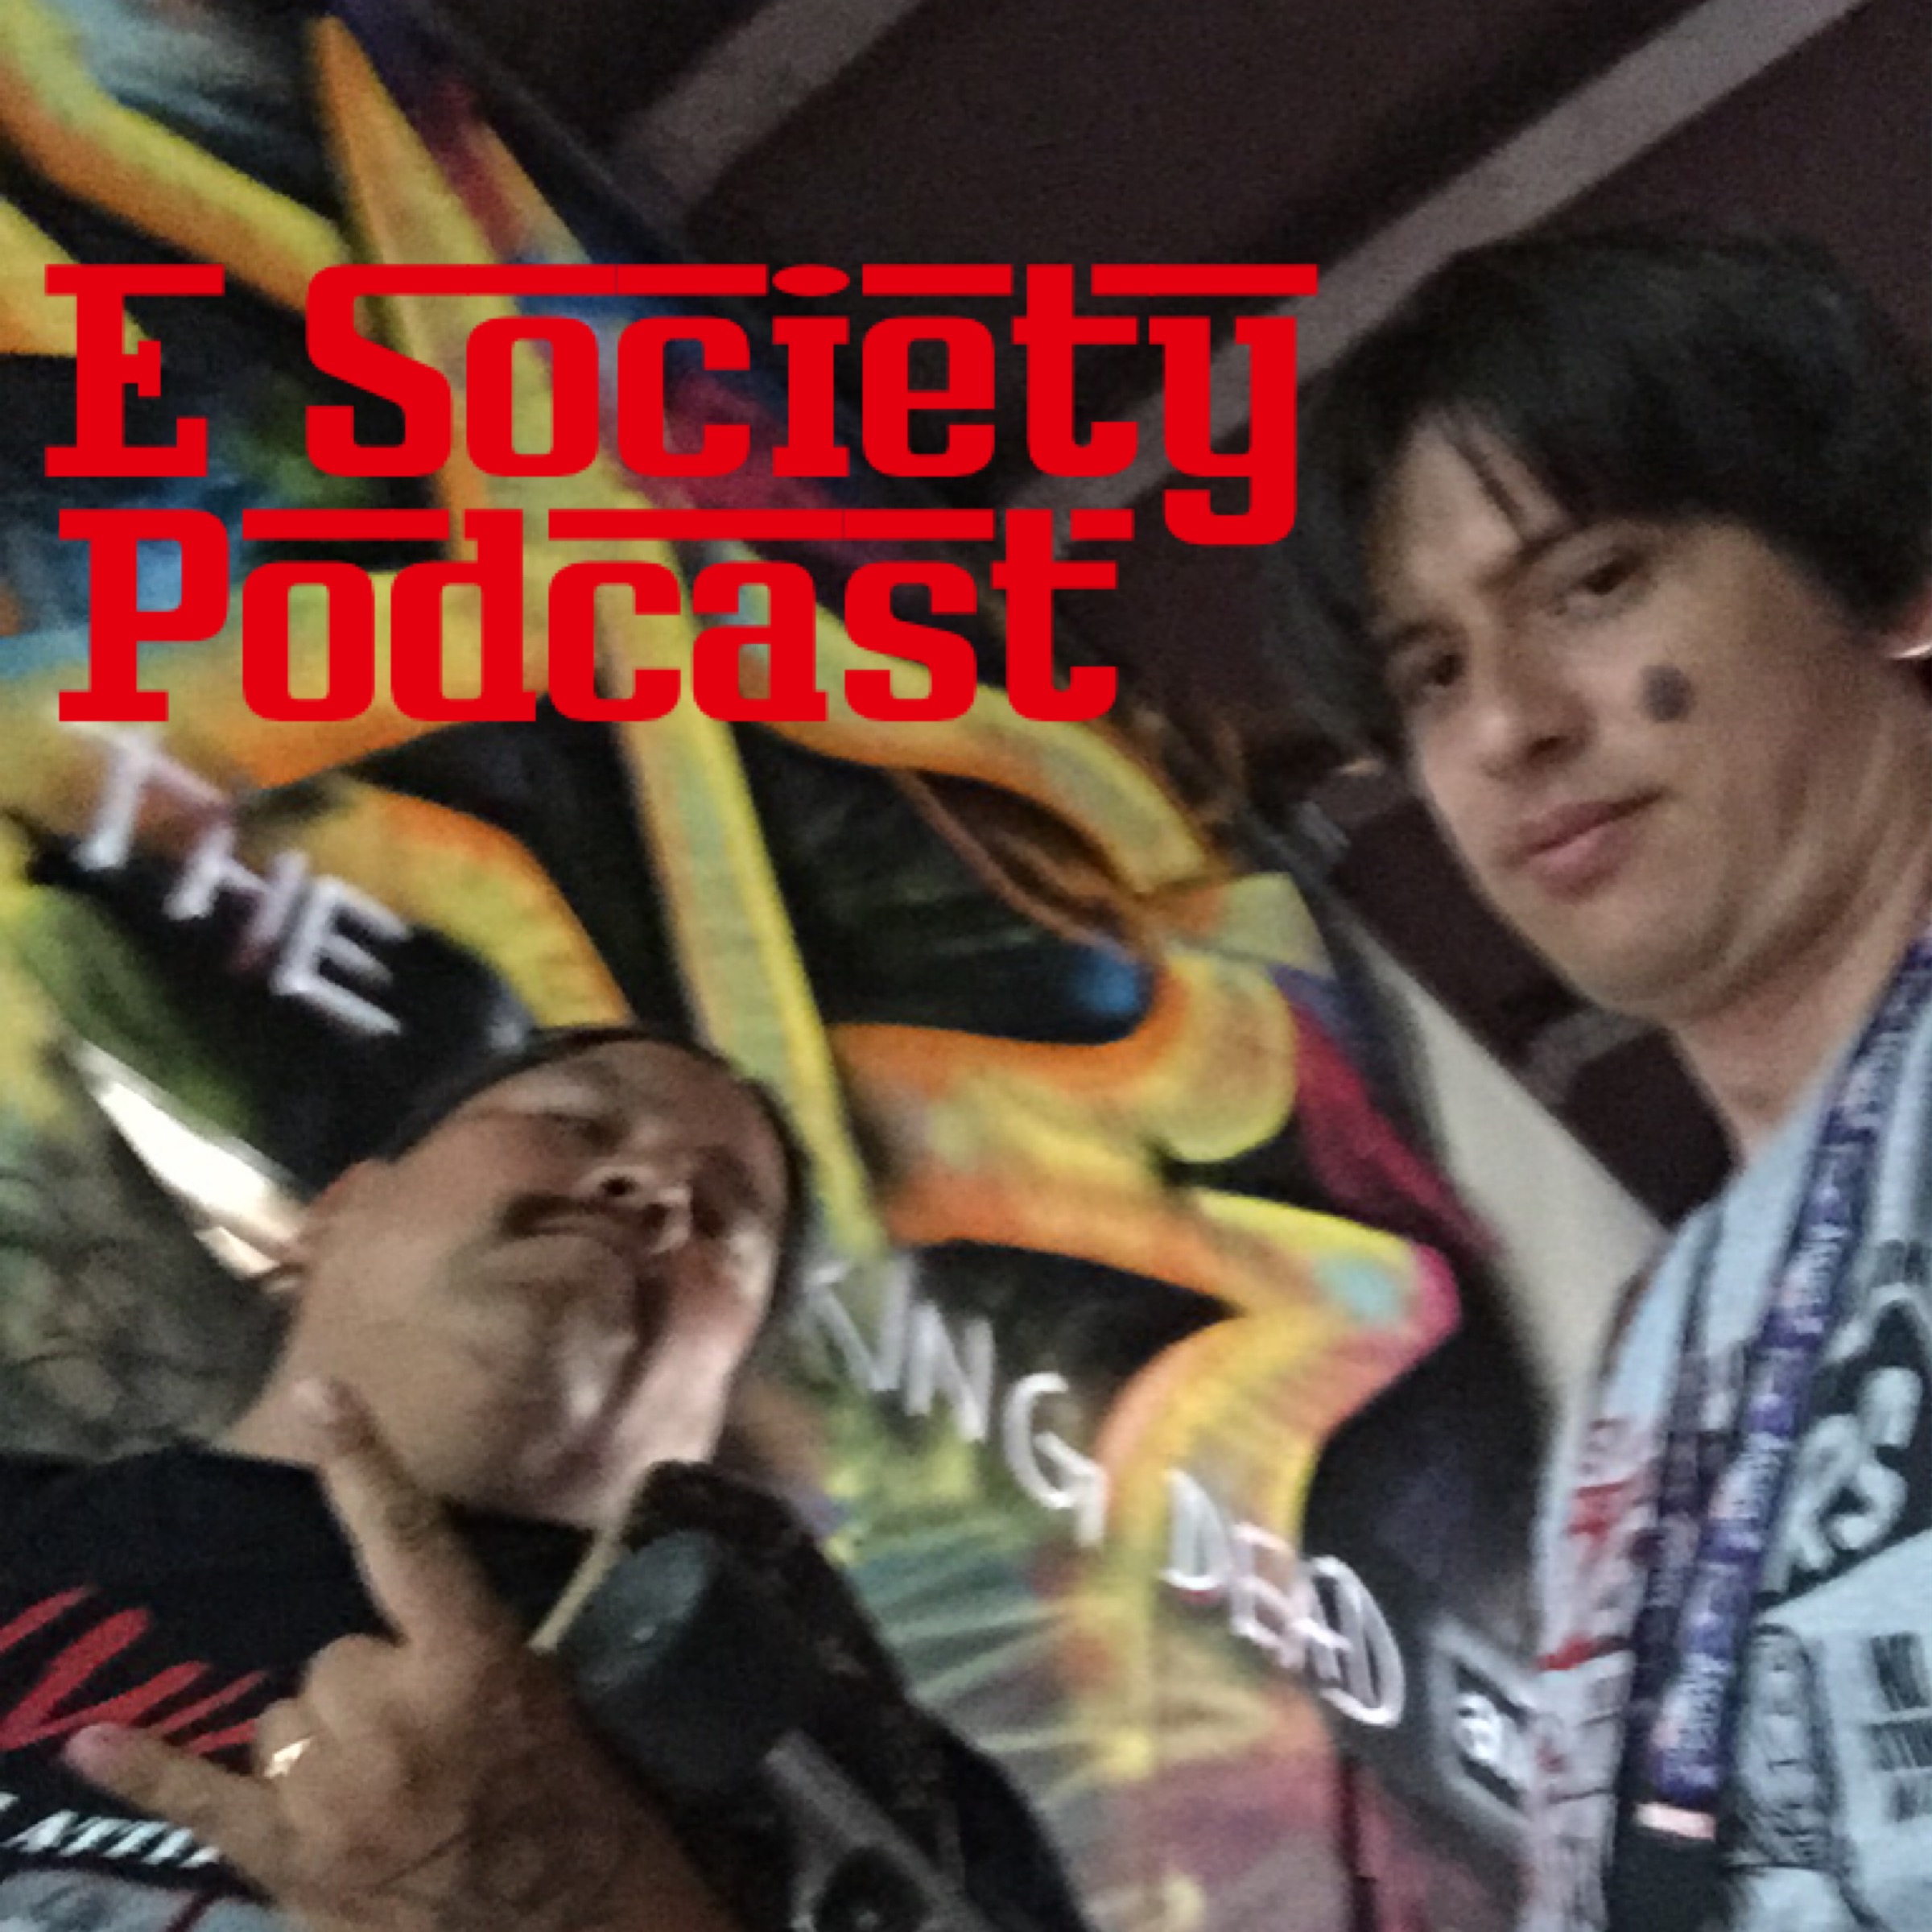 E Society Podcast - Ep. 92: You can’t see me!